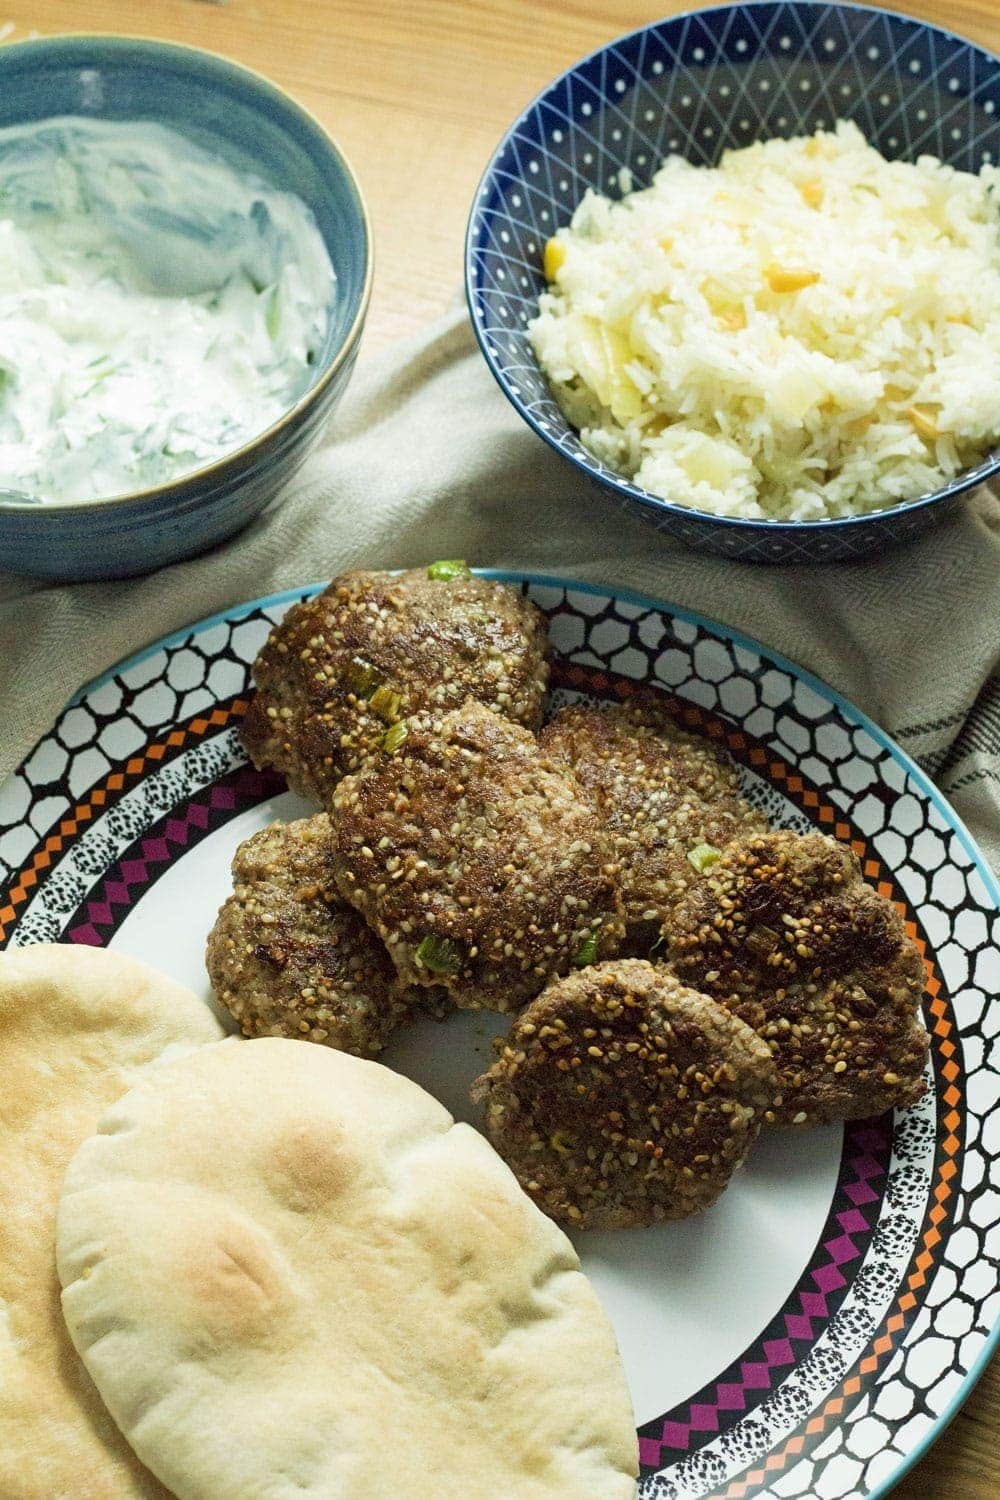 This sesame lamb recipe tastes delicious stuffed in a pita with some cucumber and mint yoghurt drizzled on top and some pin nut rice on the side.